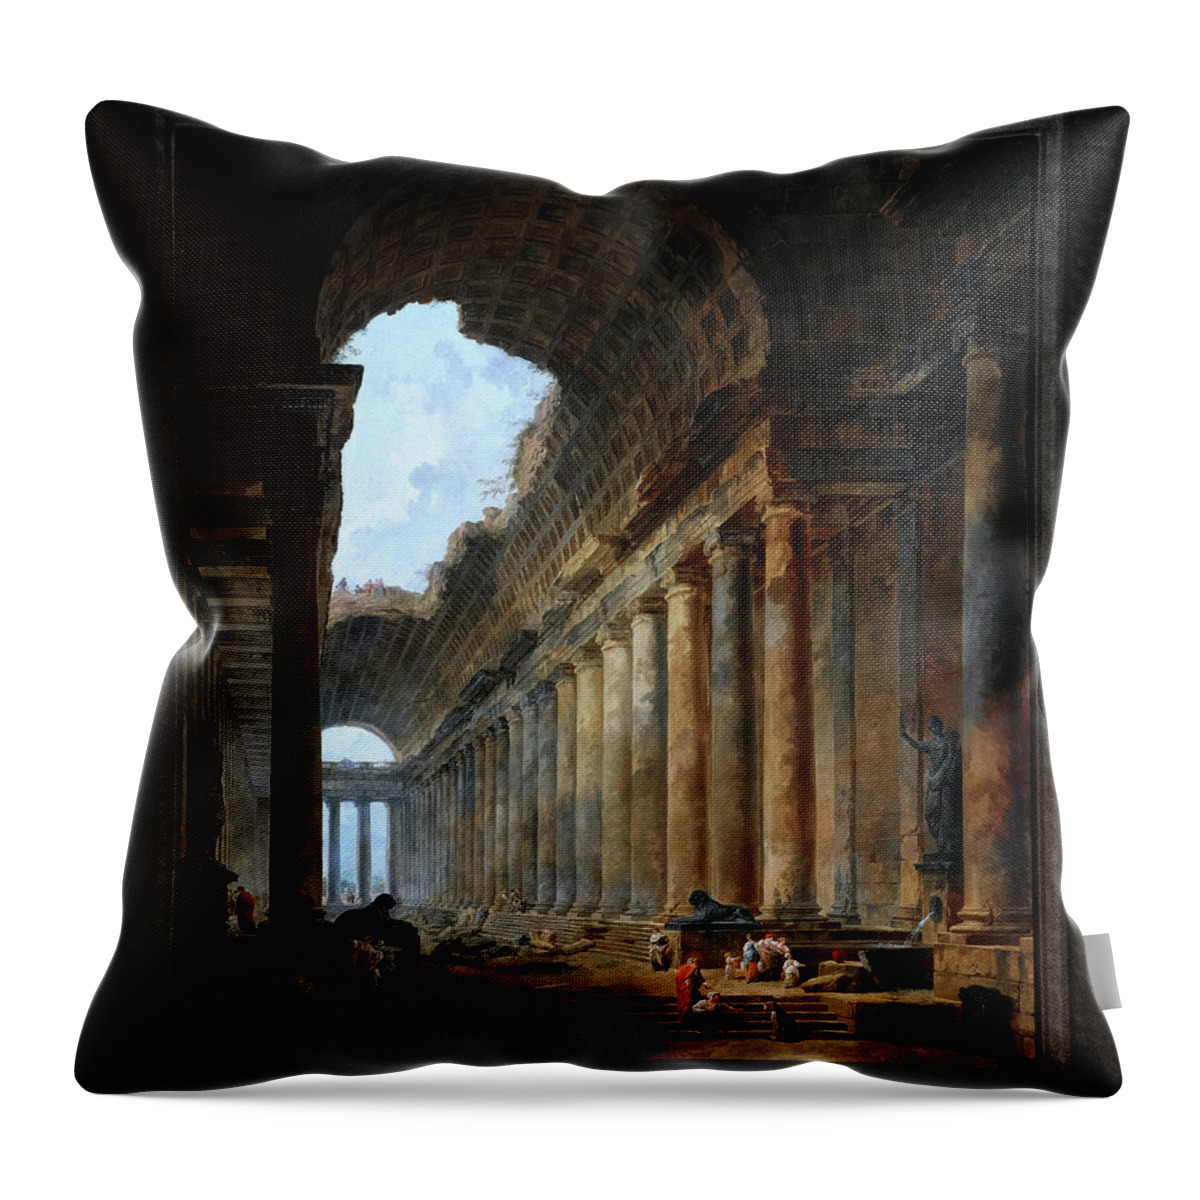 The Old Temple Throw Pillow featuring the painting The Old Temple by Hubert Robert Old Masters Fine Art Reproduction by Rolando Burbon